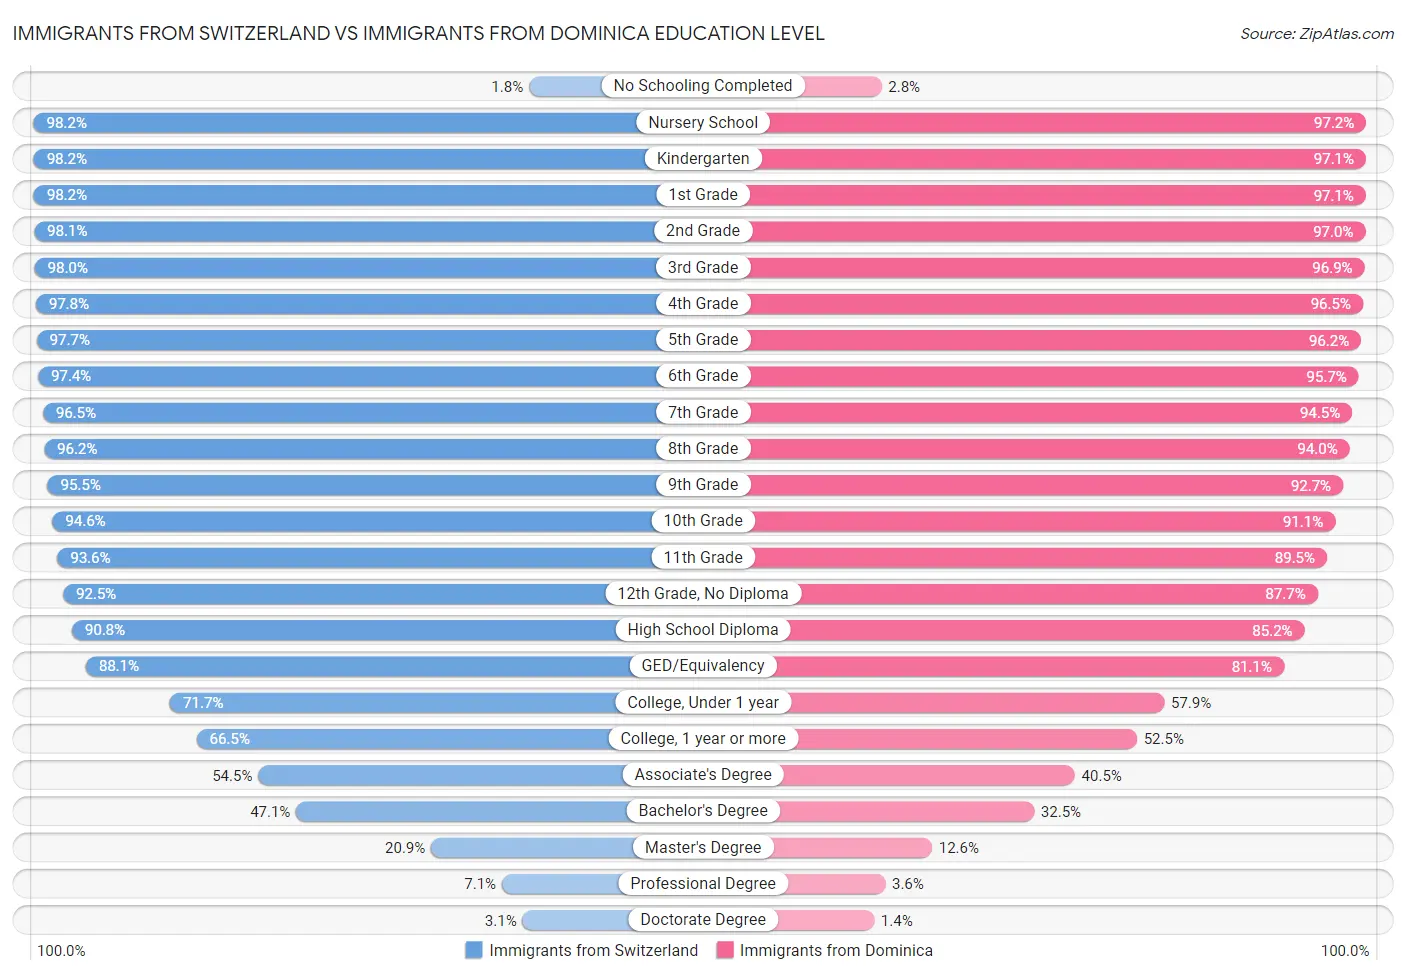 Immigrants from Switzerland vs Immigrants from Dominica Education Level